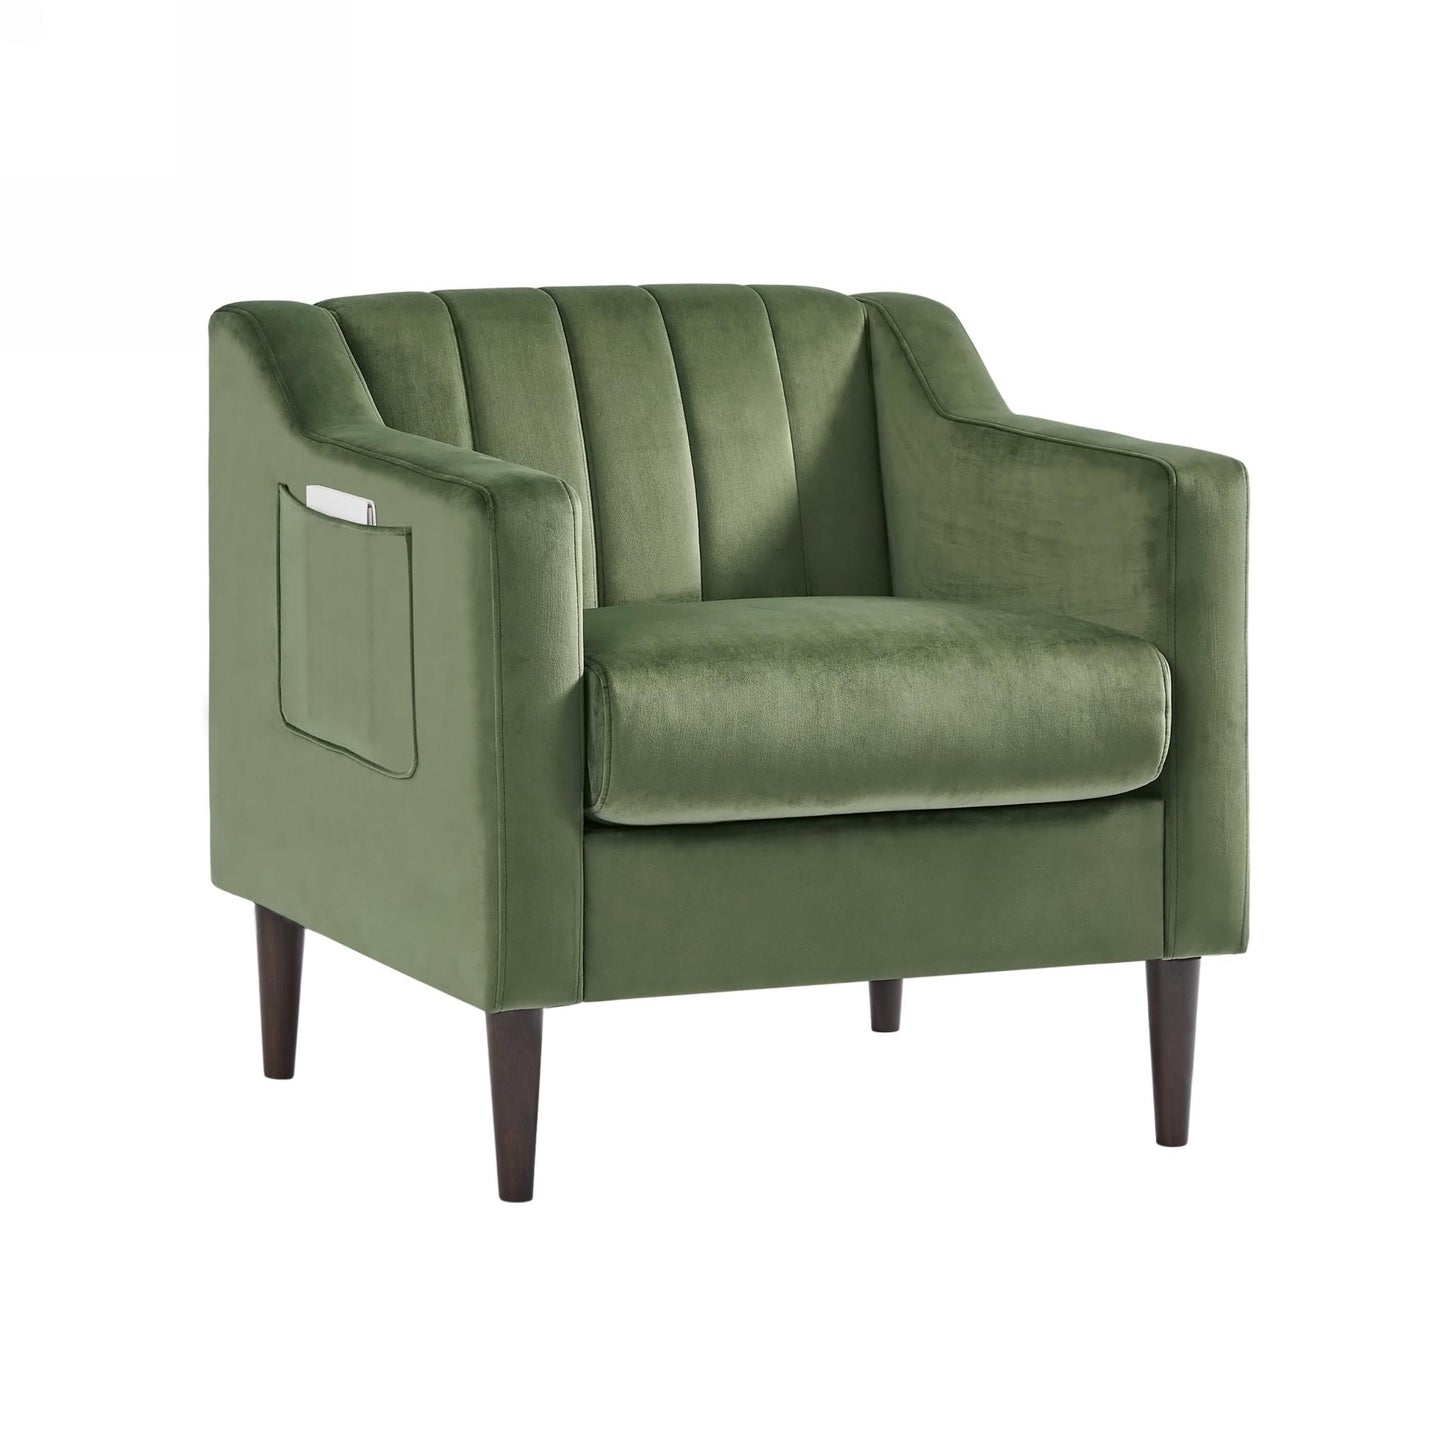 Modern velvet fabric single person sofa side chair with solid wood legs, used in bedroom, living room and office.